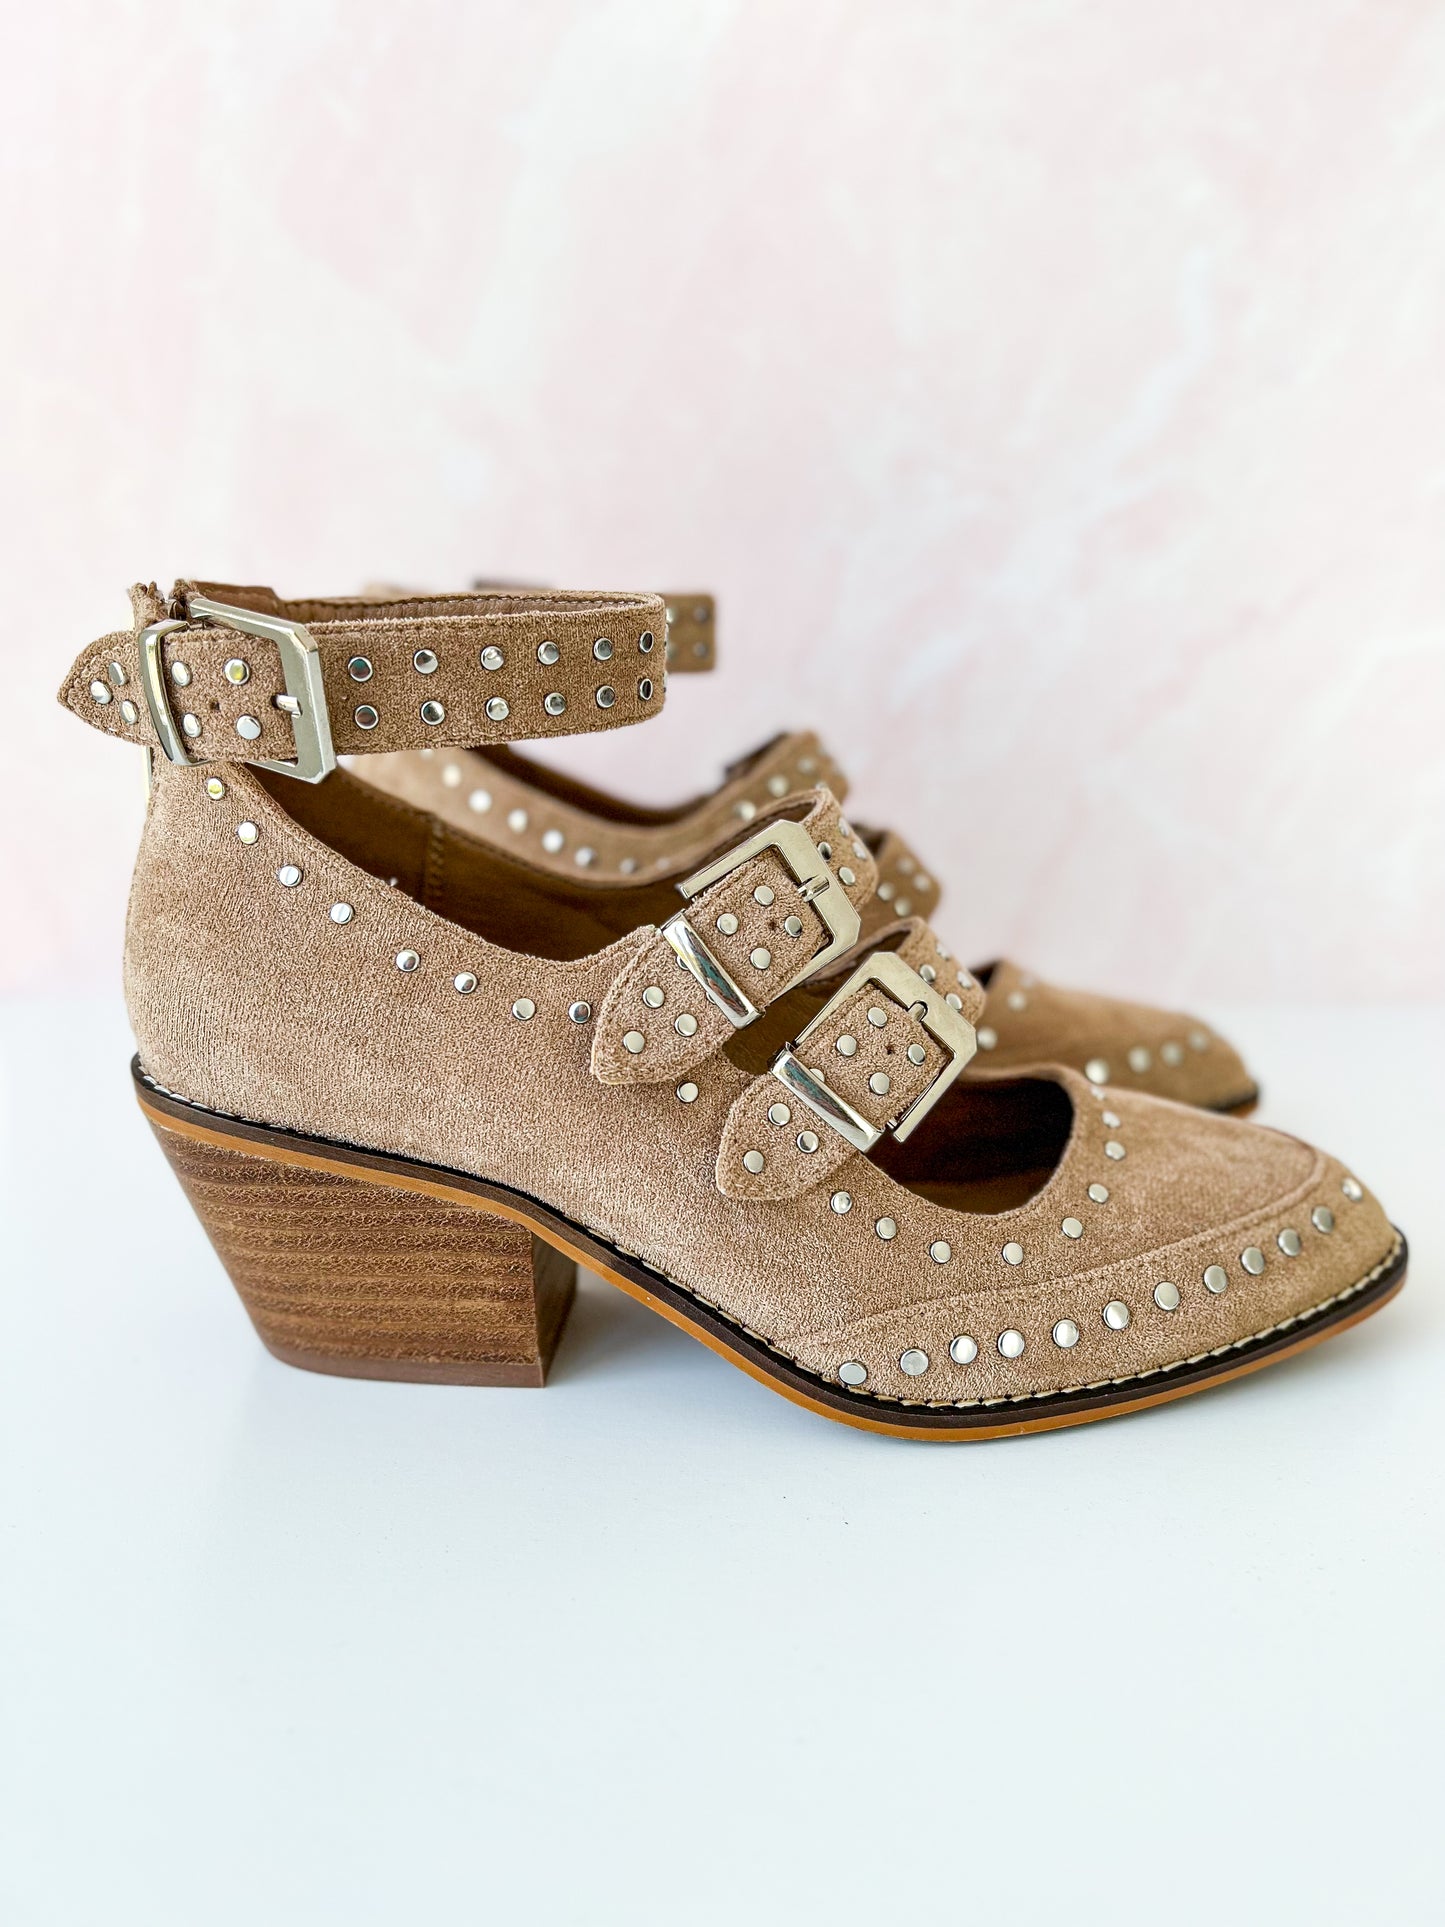 Corky's Cackle Wedge - Sand Suede